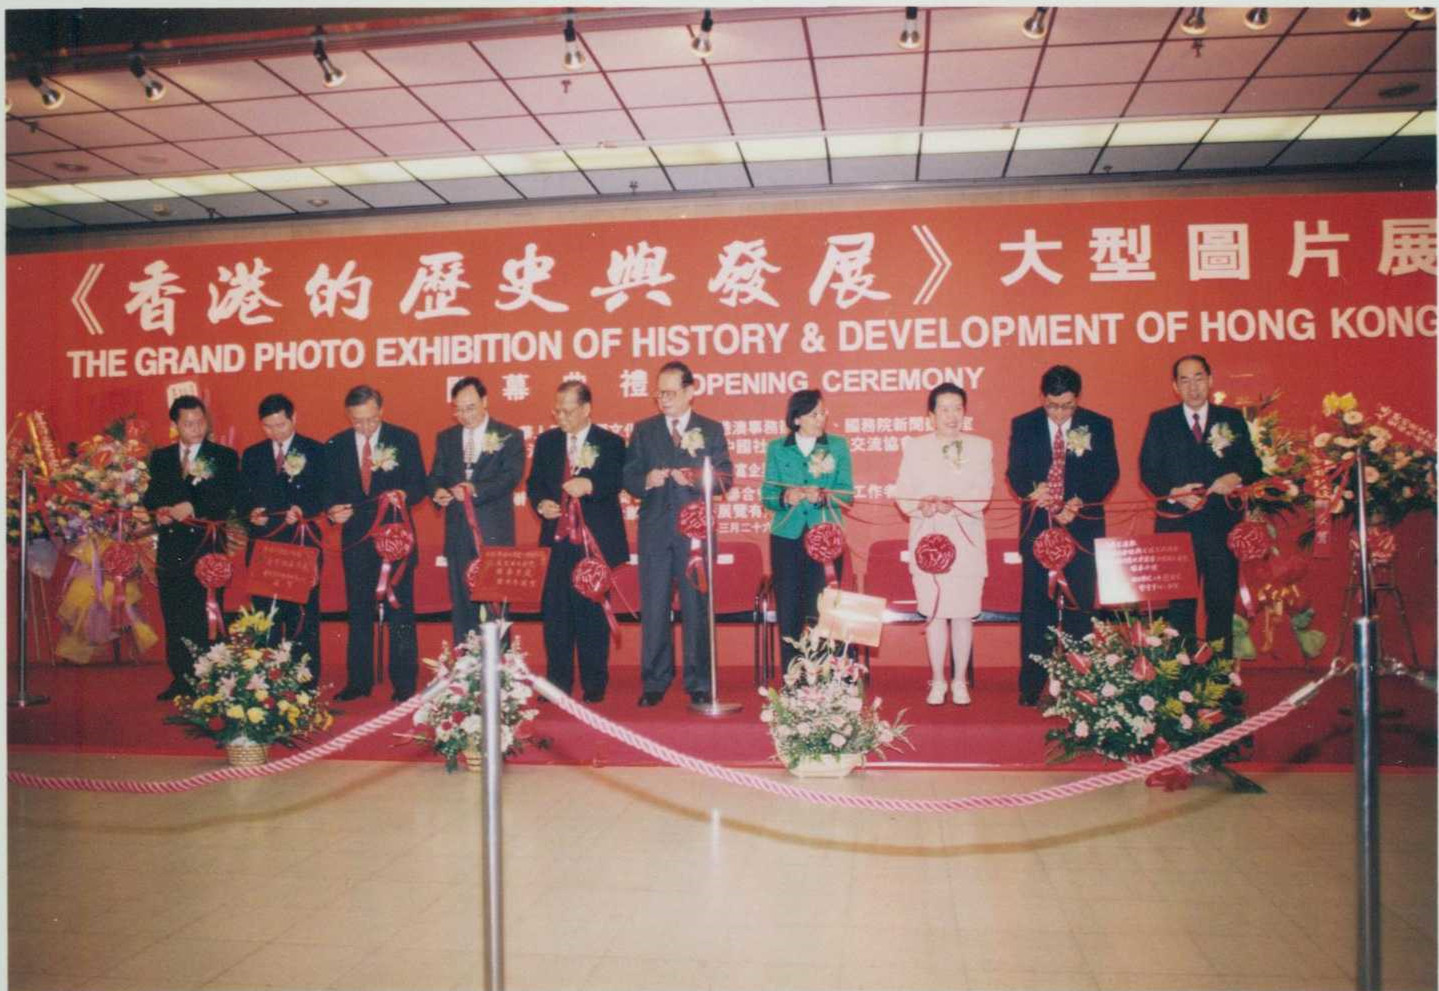 Hong Kong’s large-scale photo exhibition of history and development was exhibited